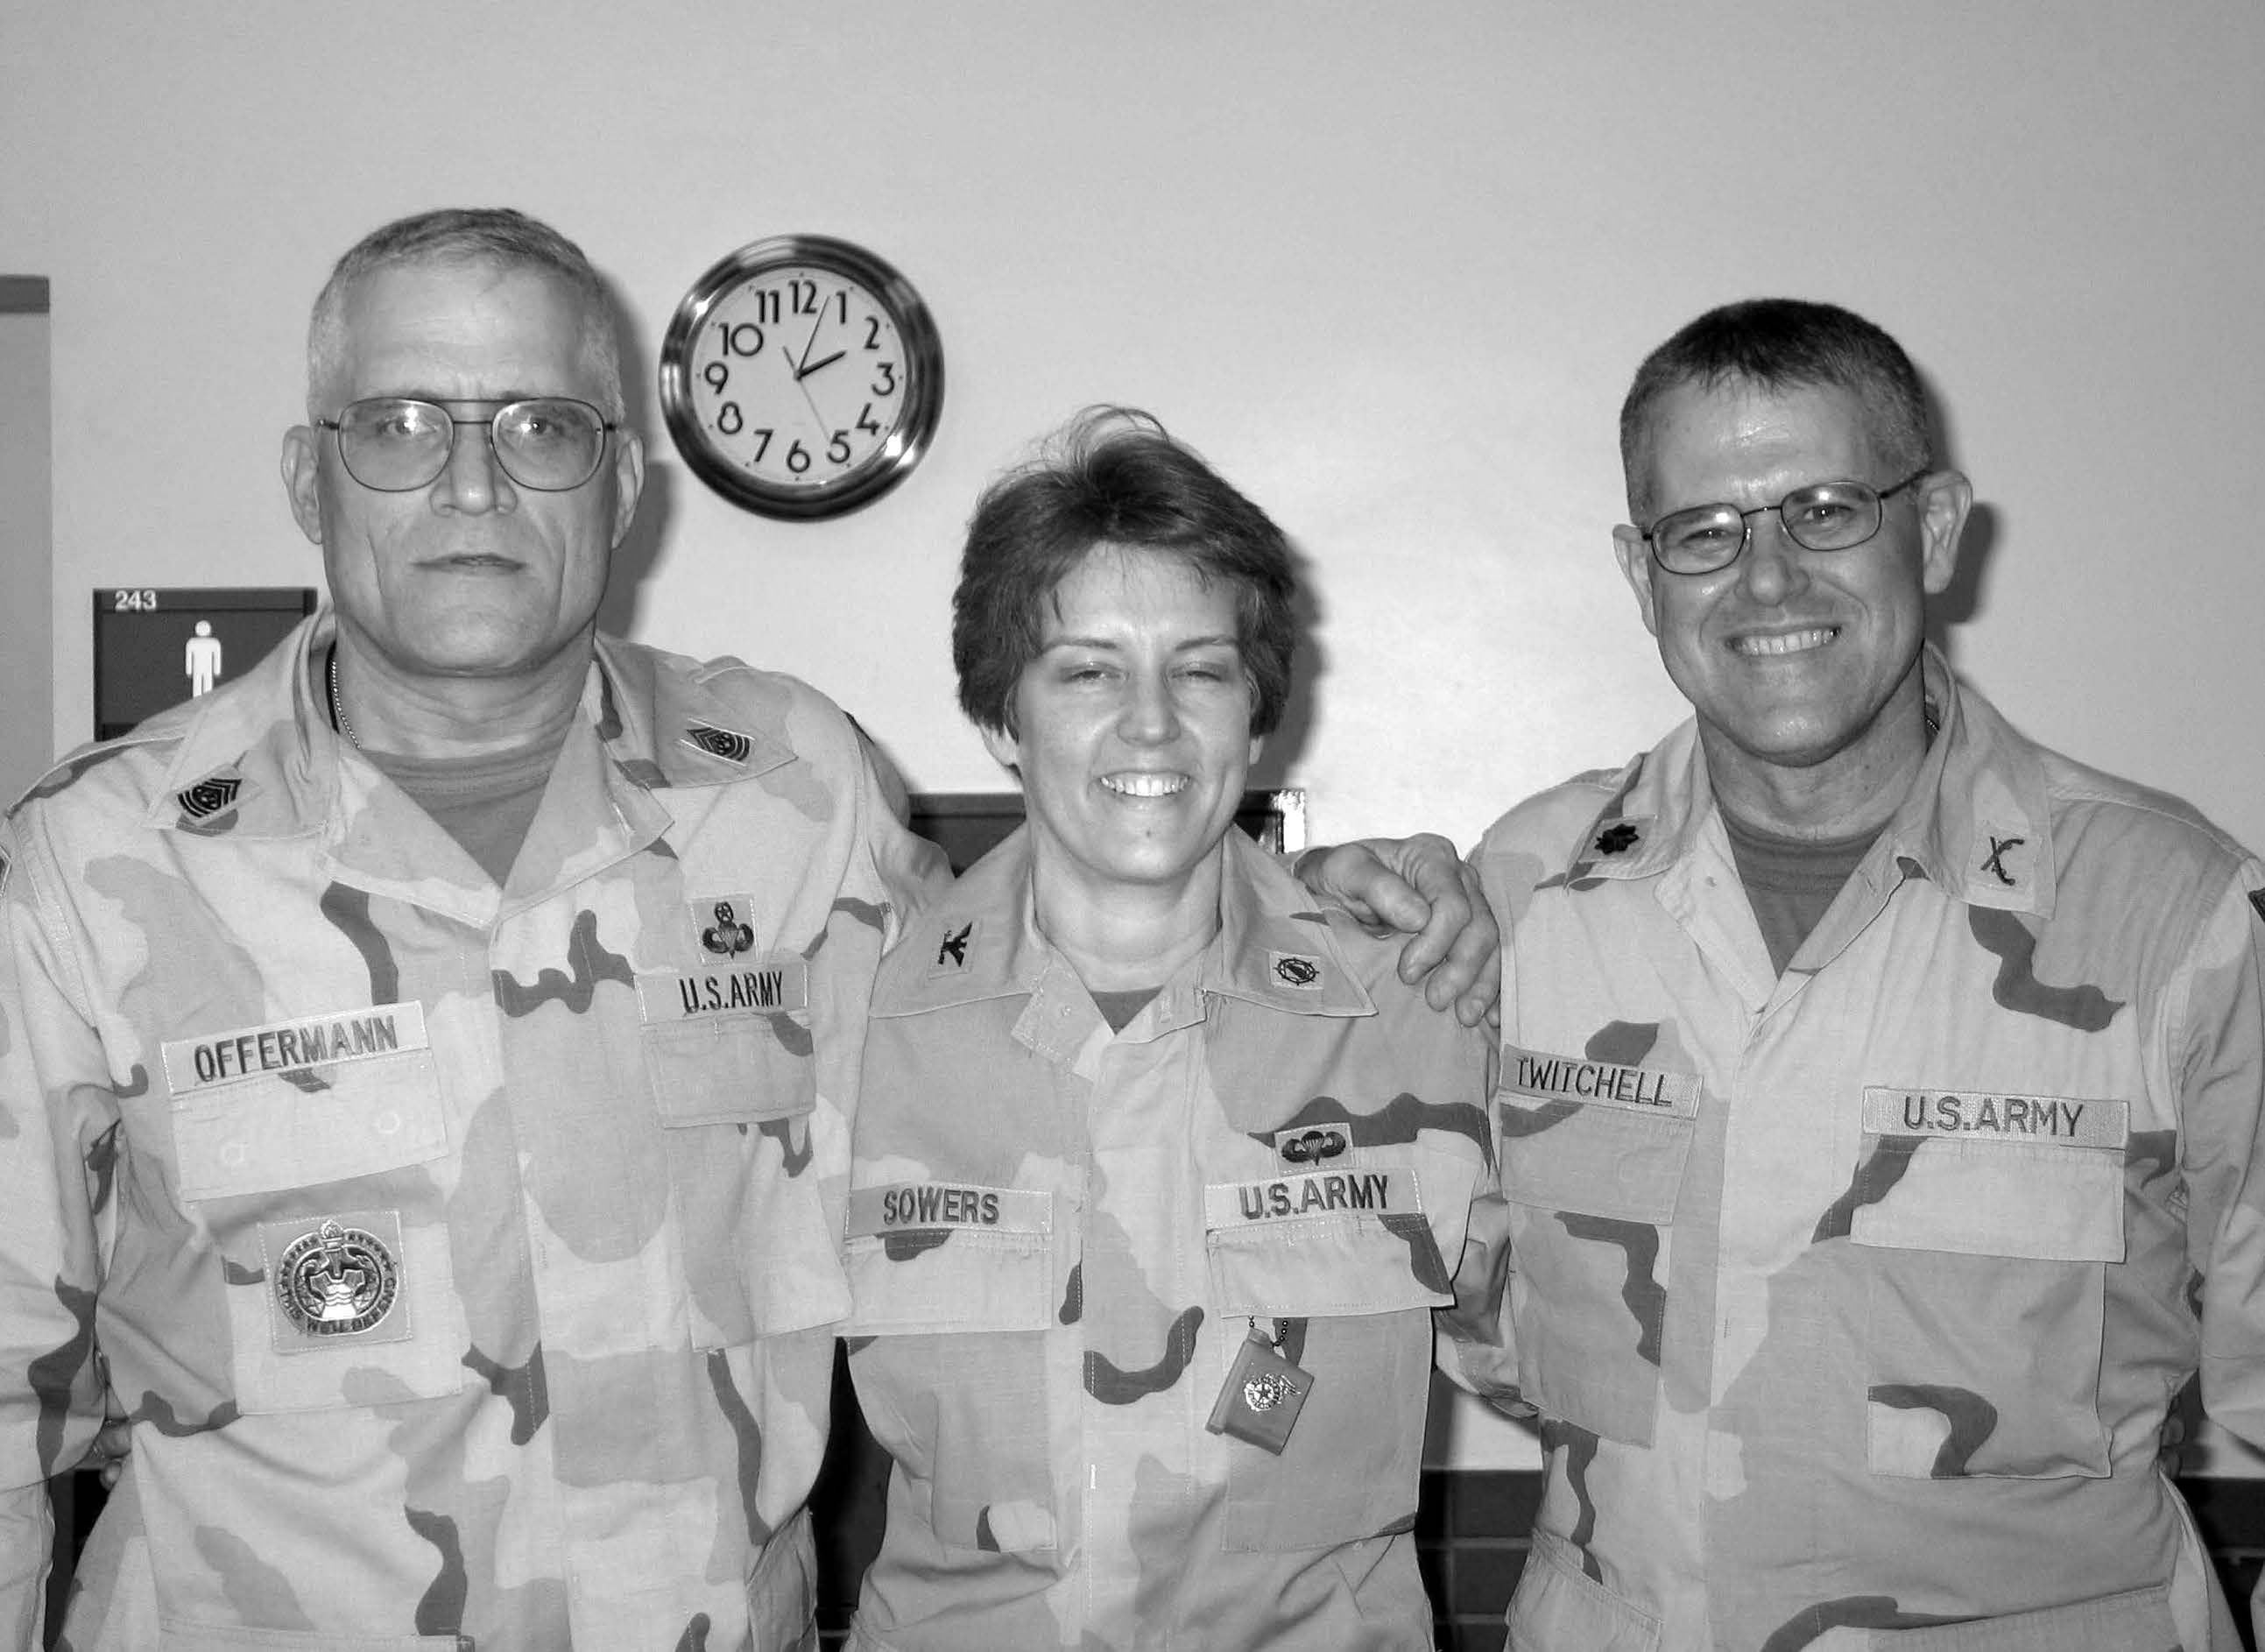 Lieutenant Colonel Randall E. Twitchell (right), Command Sergeant Major Mark Offermann (left), and brigade commander Colonel Susan Sowers (center) are shown on the day the battalion colors were cased in Mannheim, Germany. Courtesy of Randall E. Twitchell.